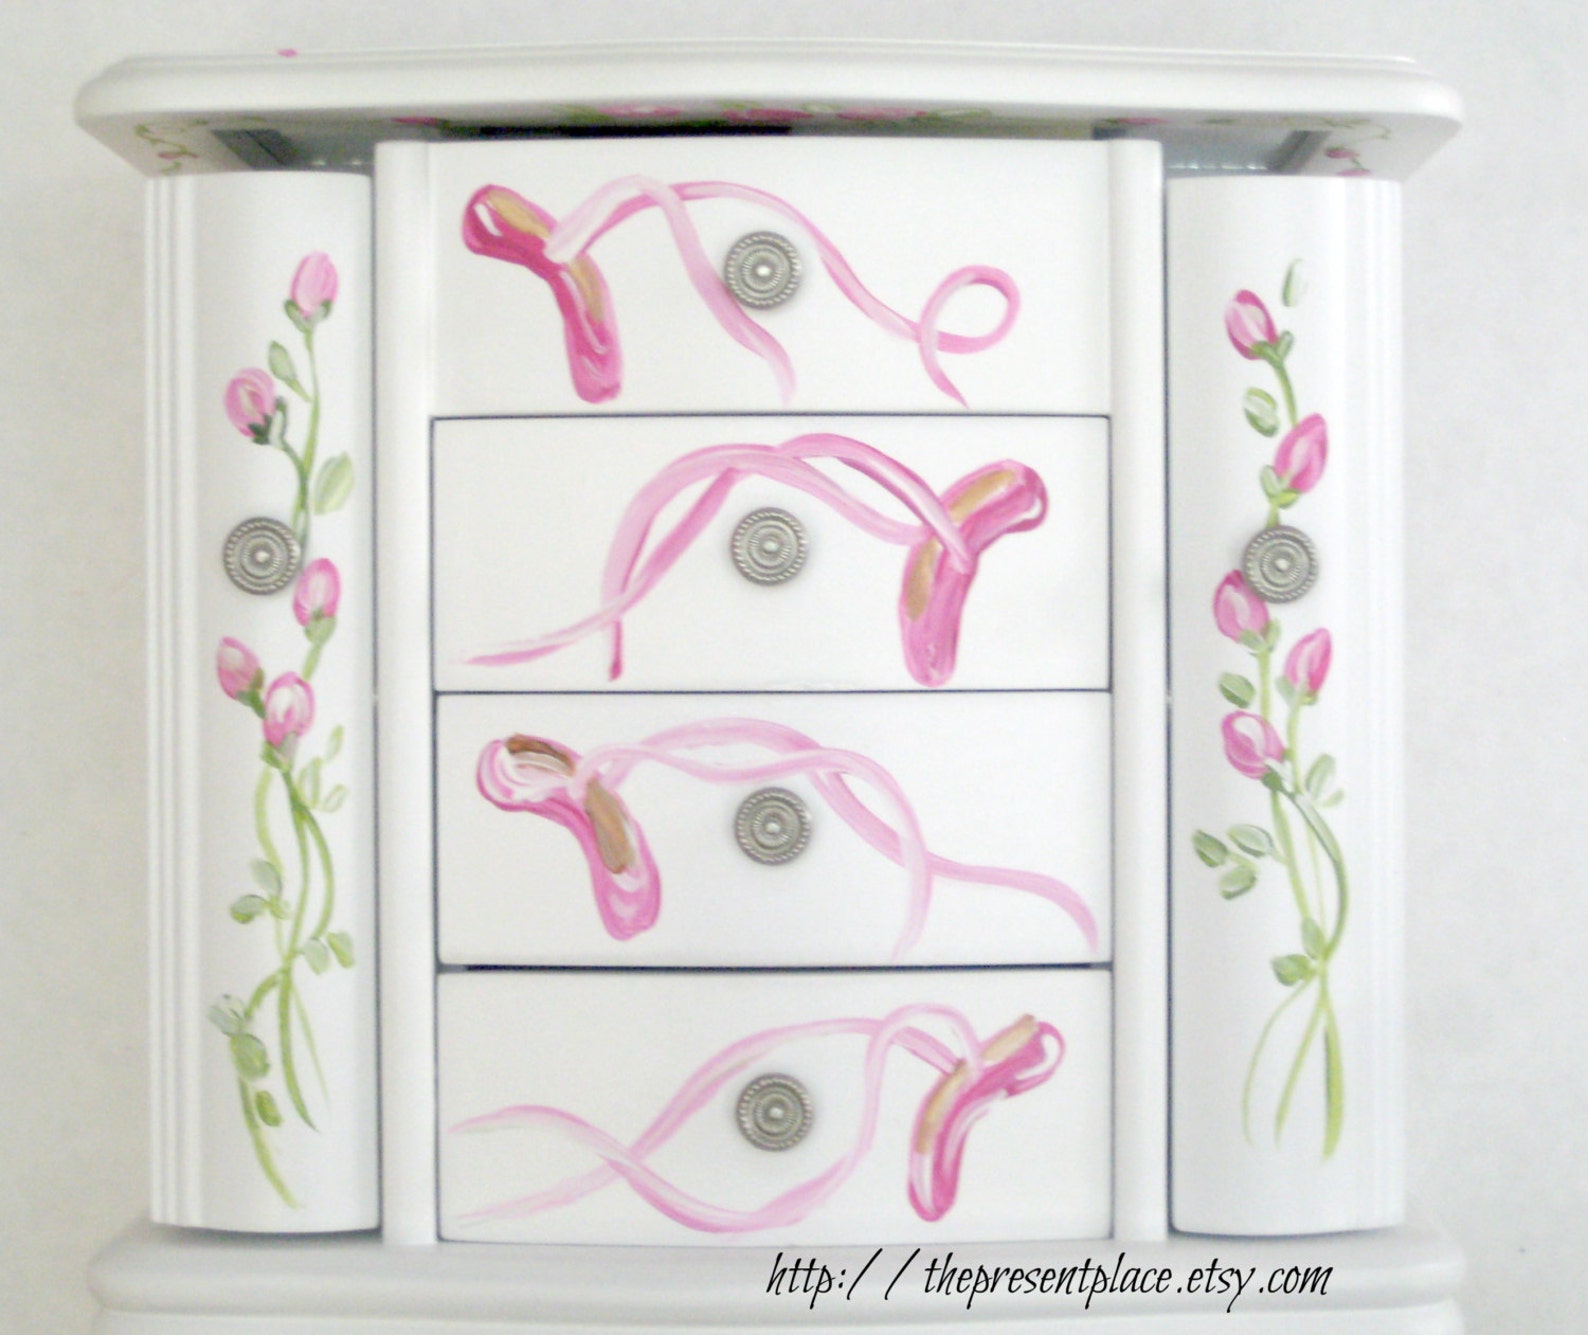 large white hanging jewelry box,four drawers,hand painted, ballerina,roses,ballet shoes,personalized jewelry box,girls jewelry b